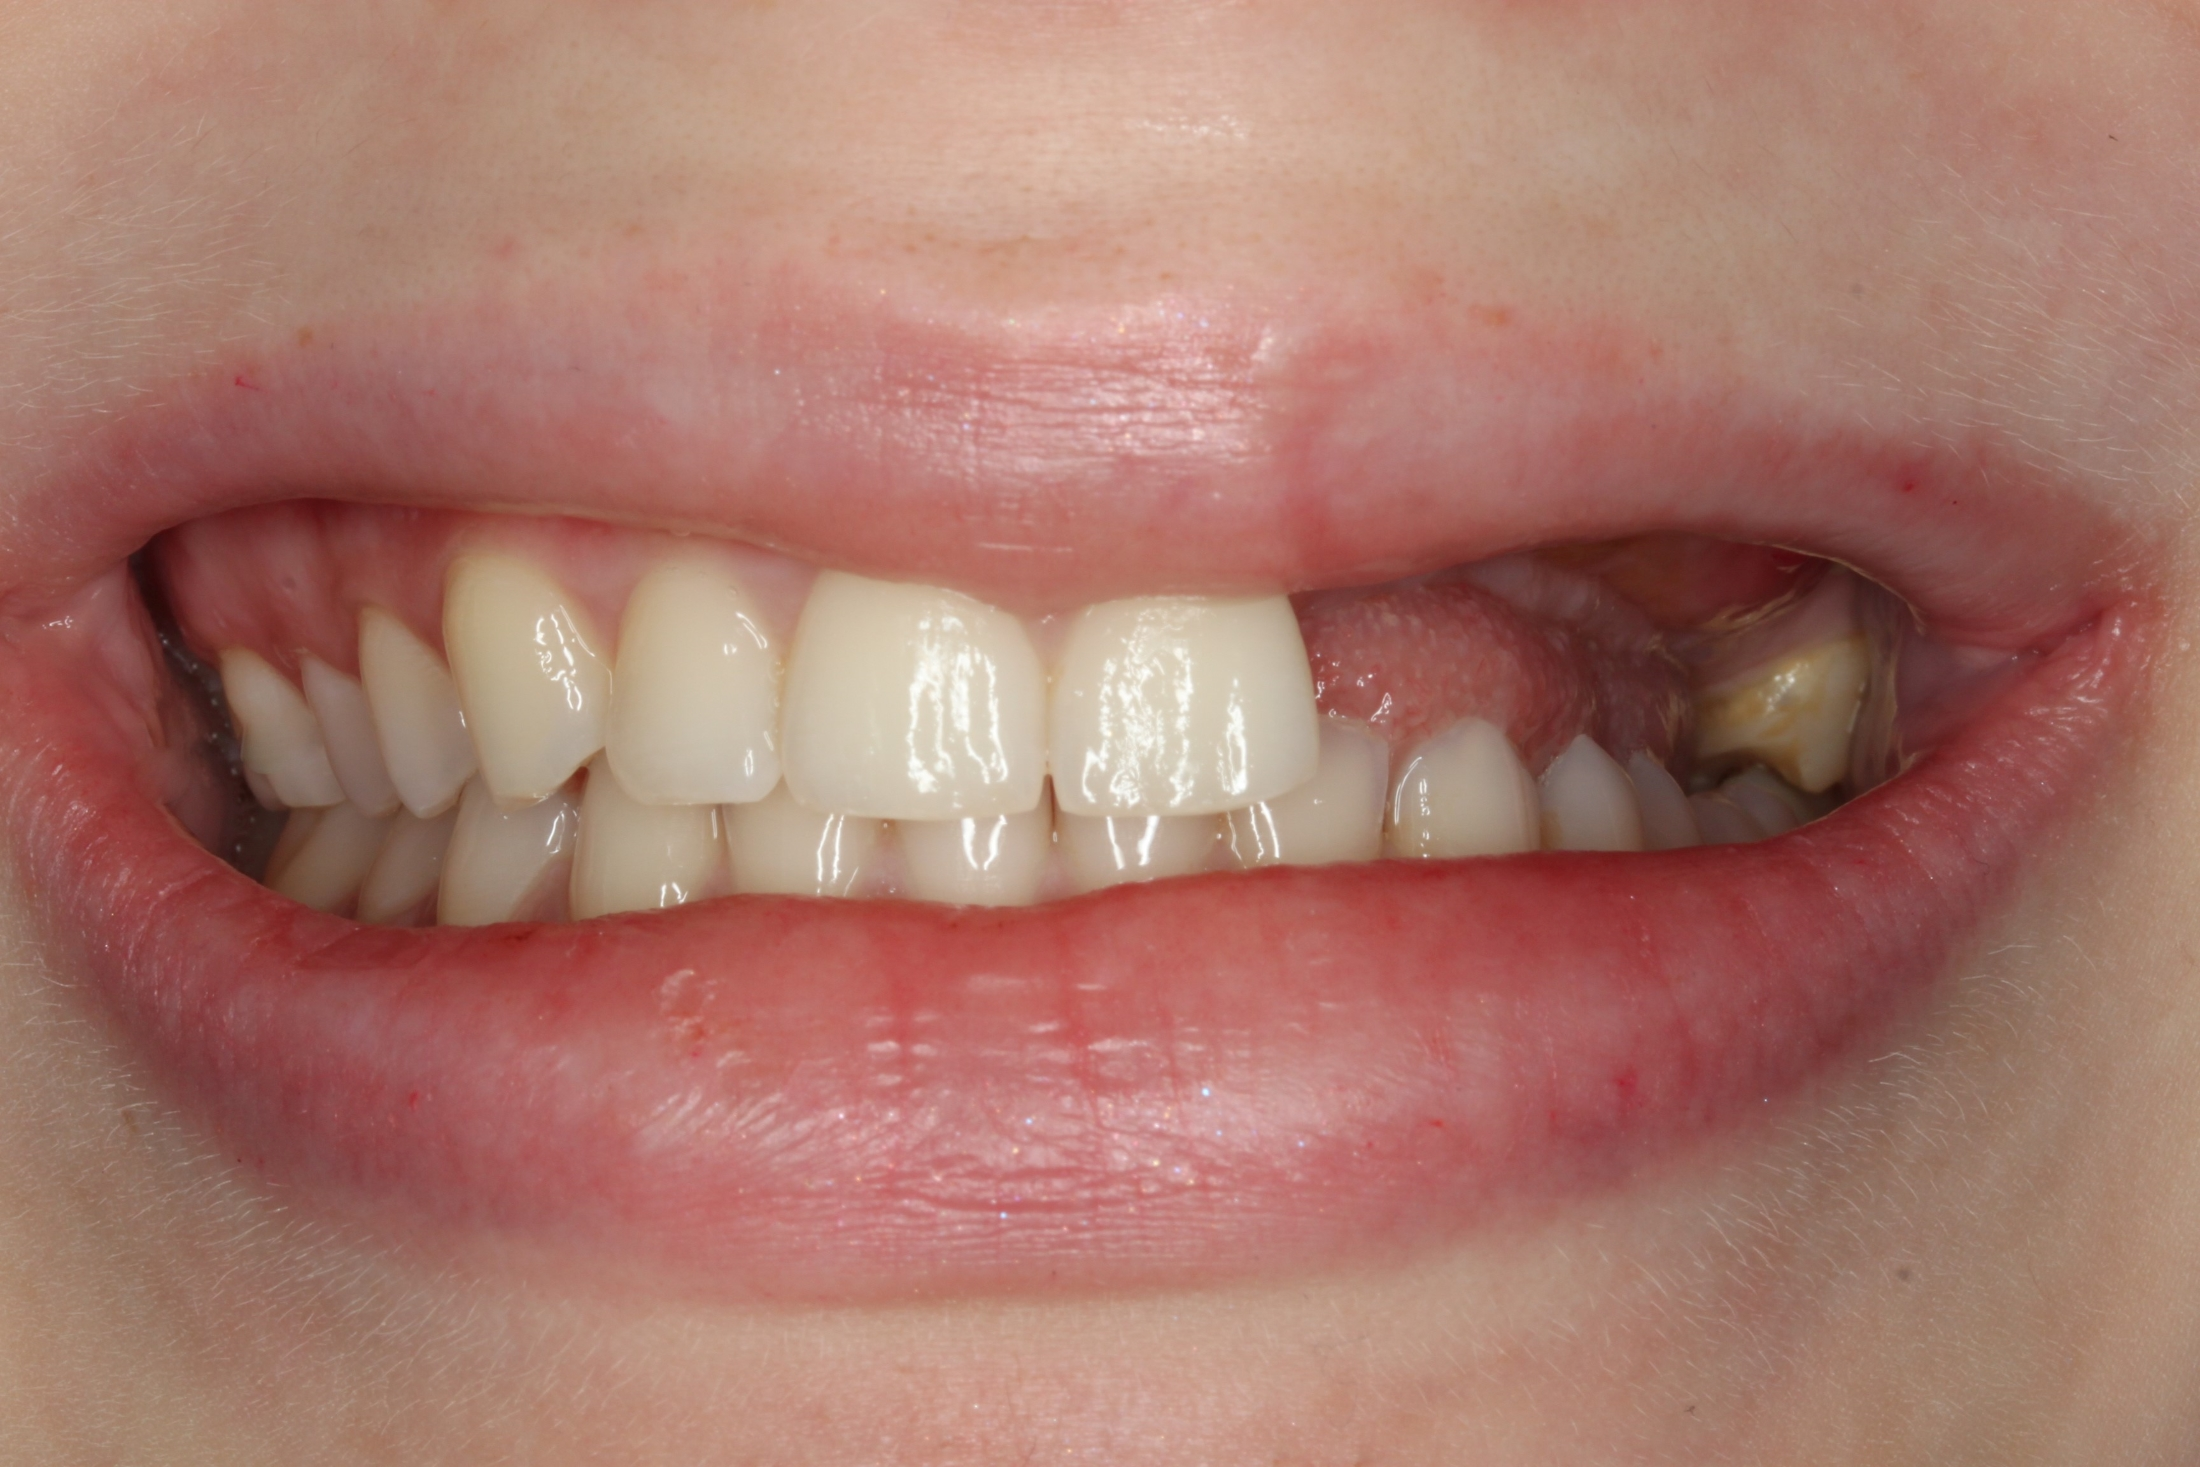 A patient's mouth with most of the teeth missing from the maxillary left quadrant